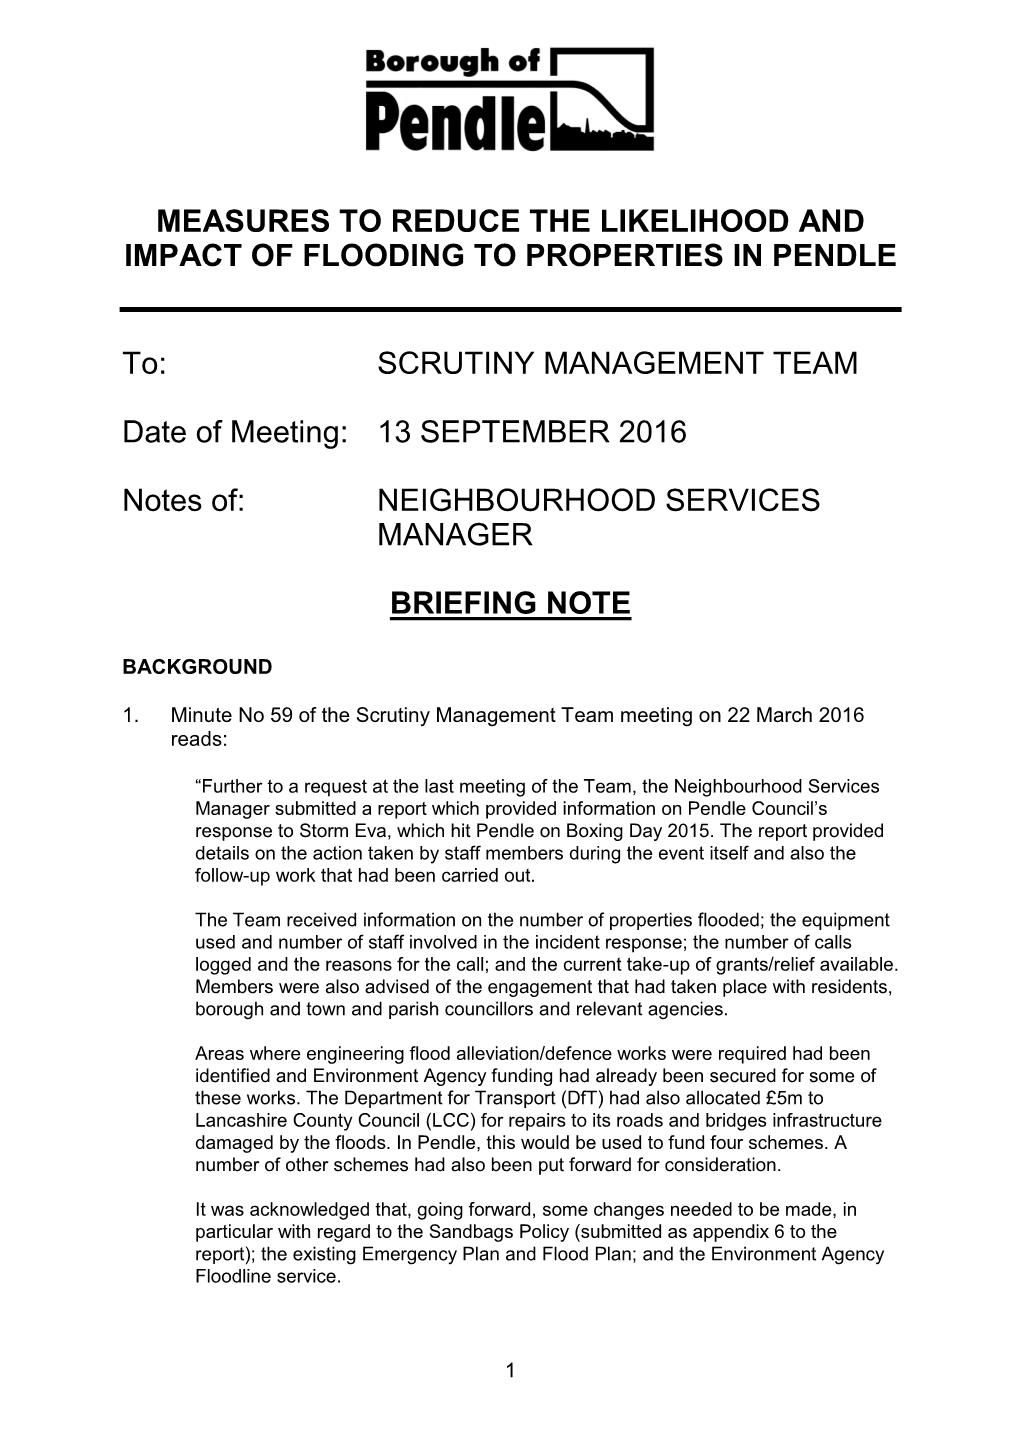 Item 5 the Council's Flood Policy